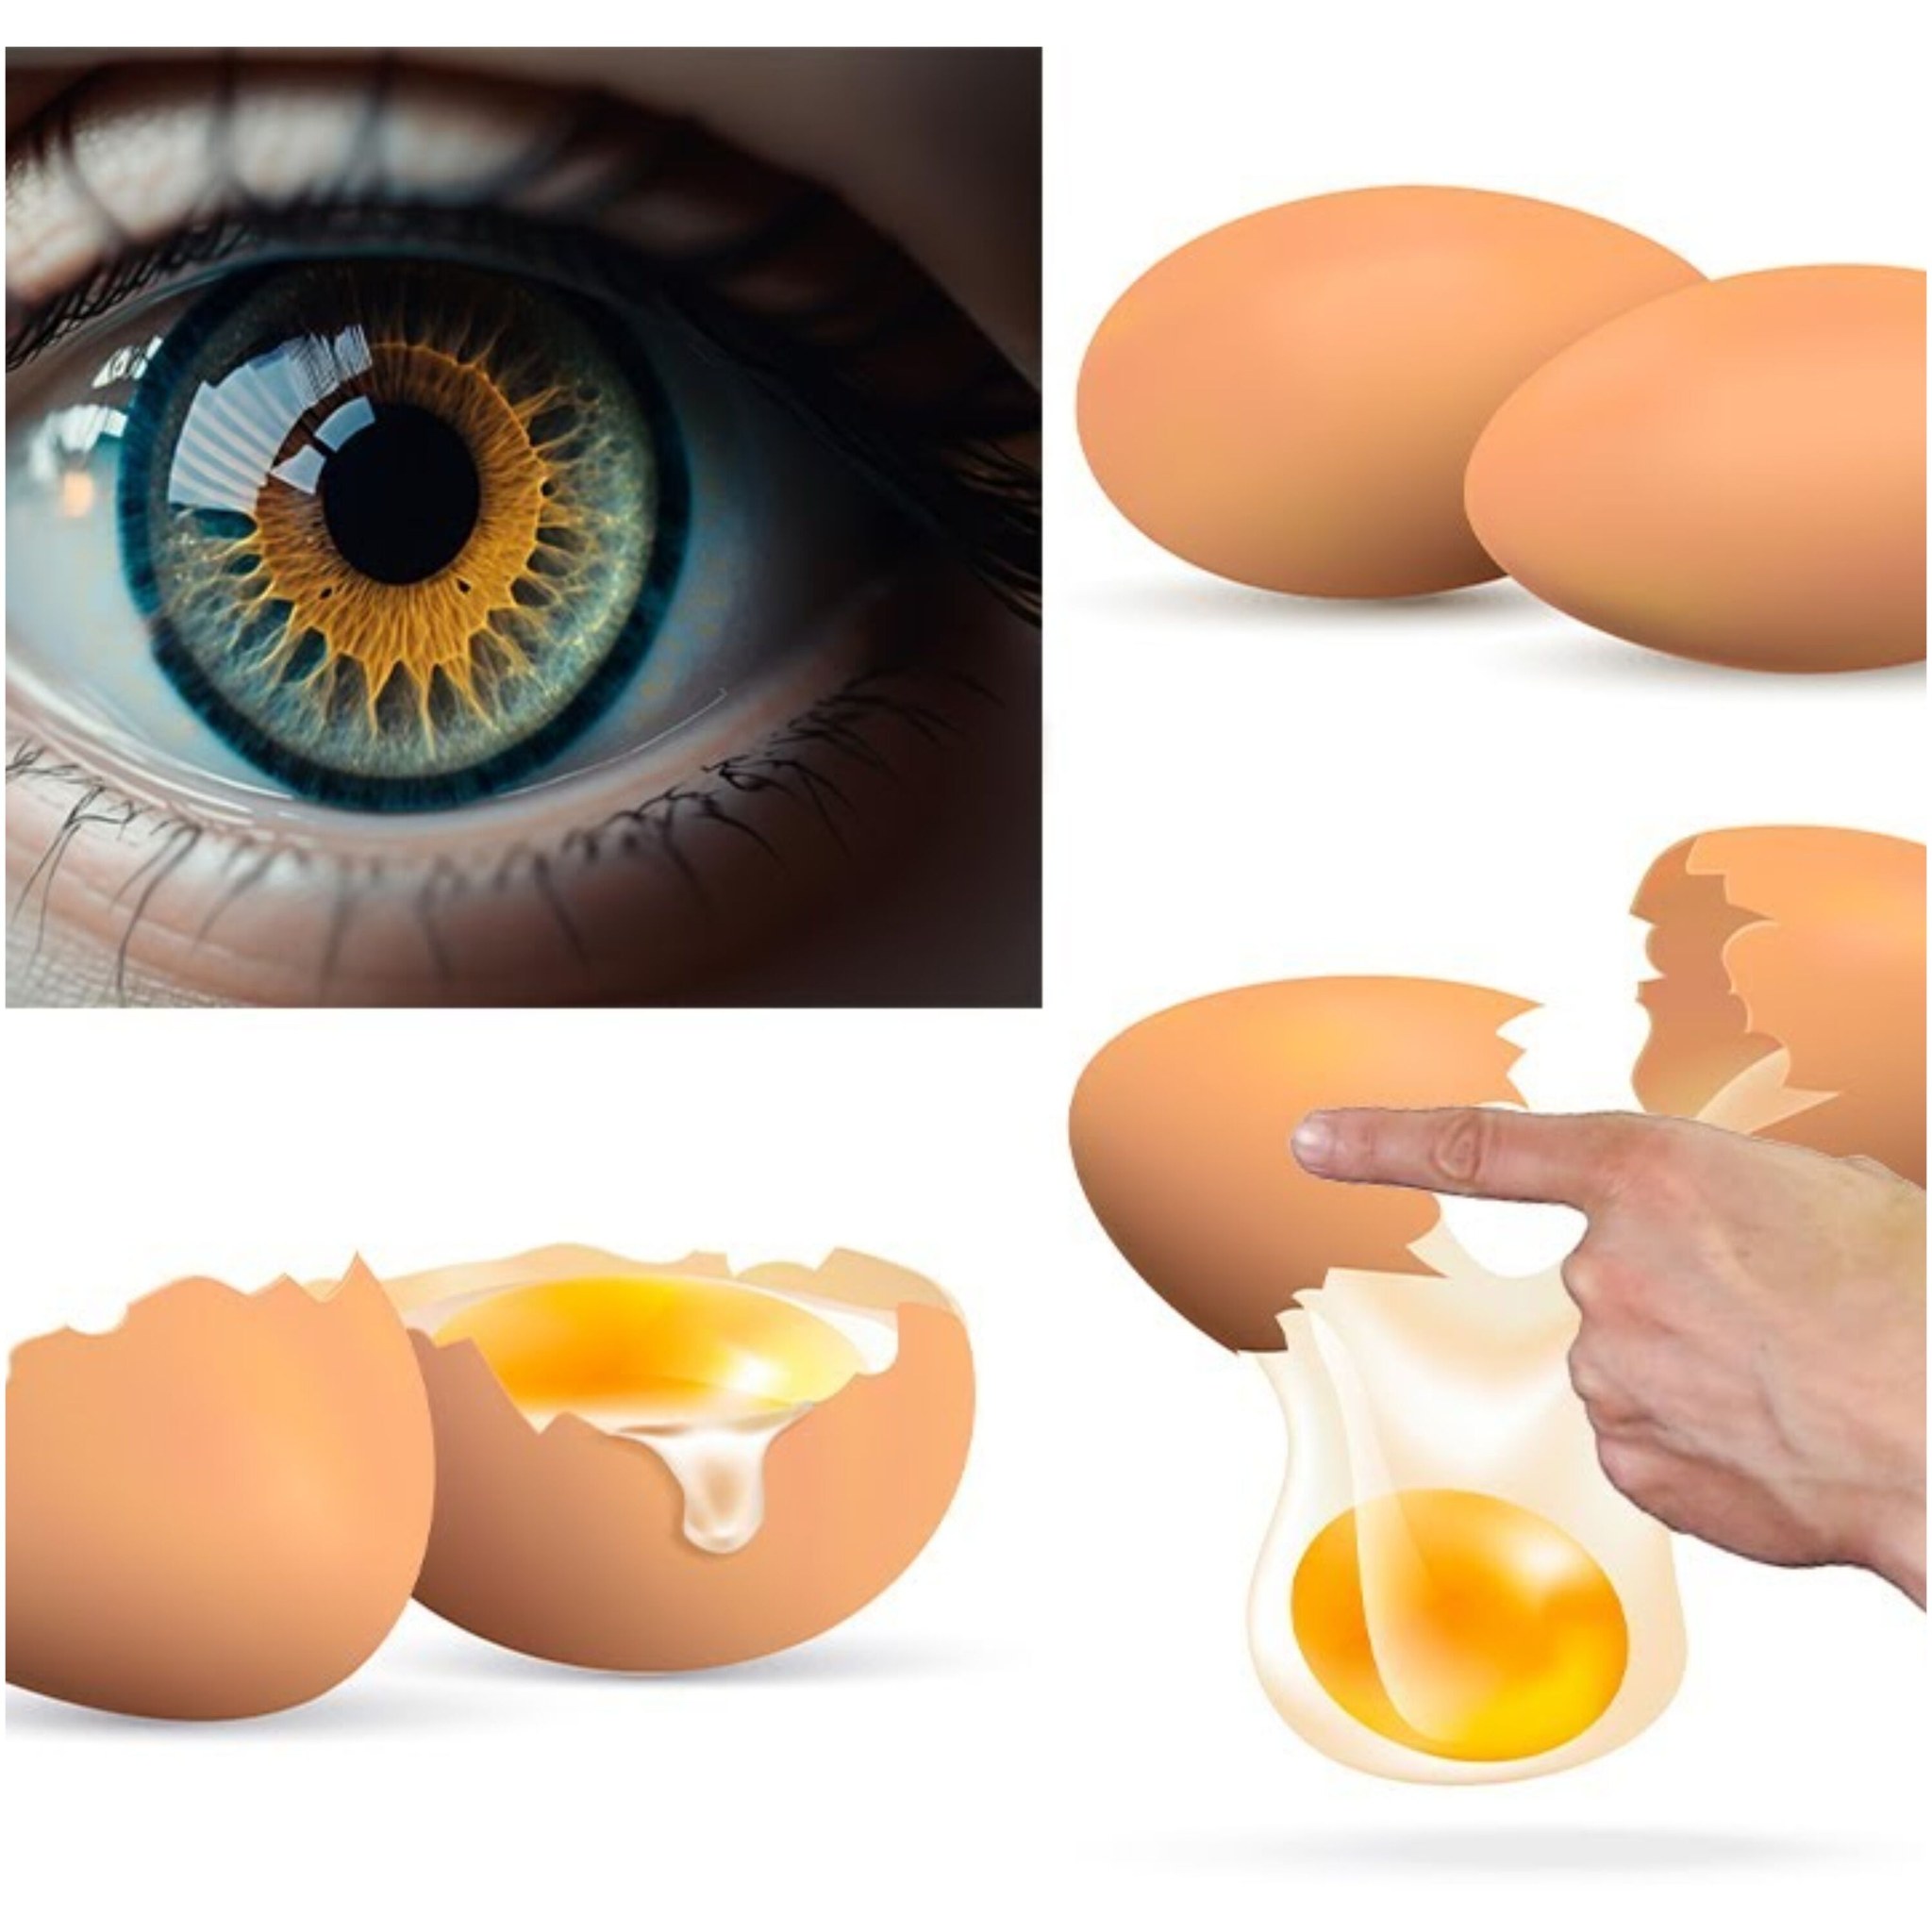 How Eggs Can Help Heal and Protect Your Eyes